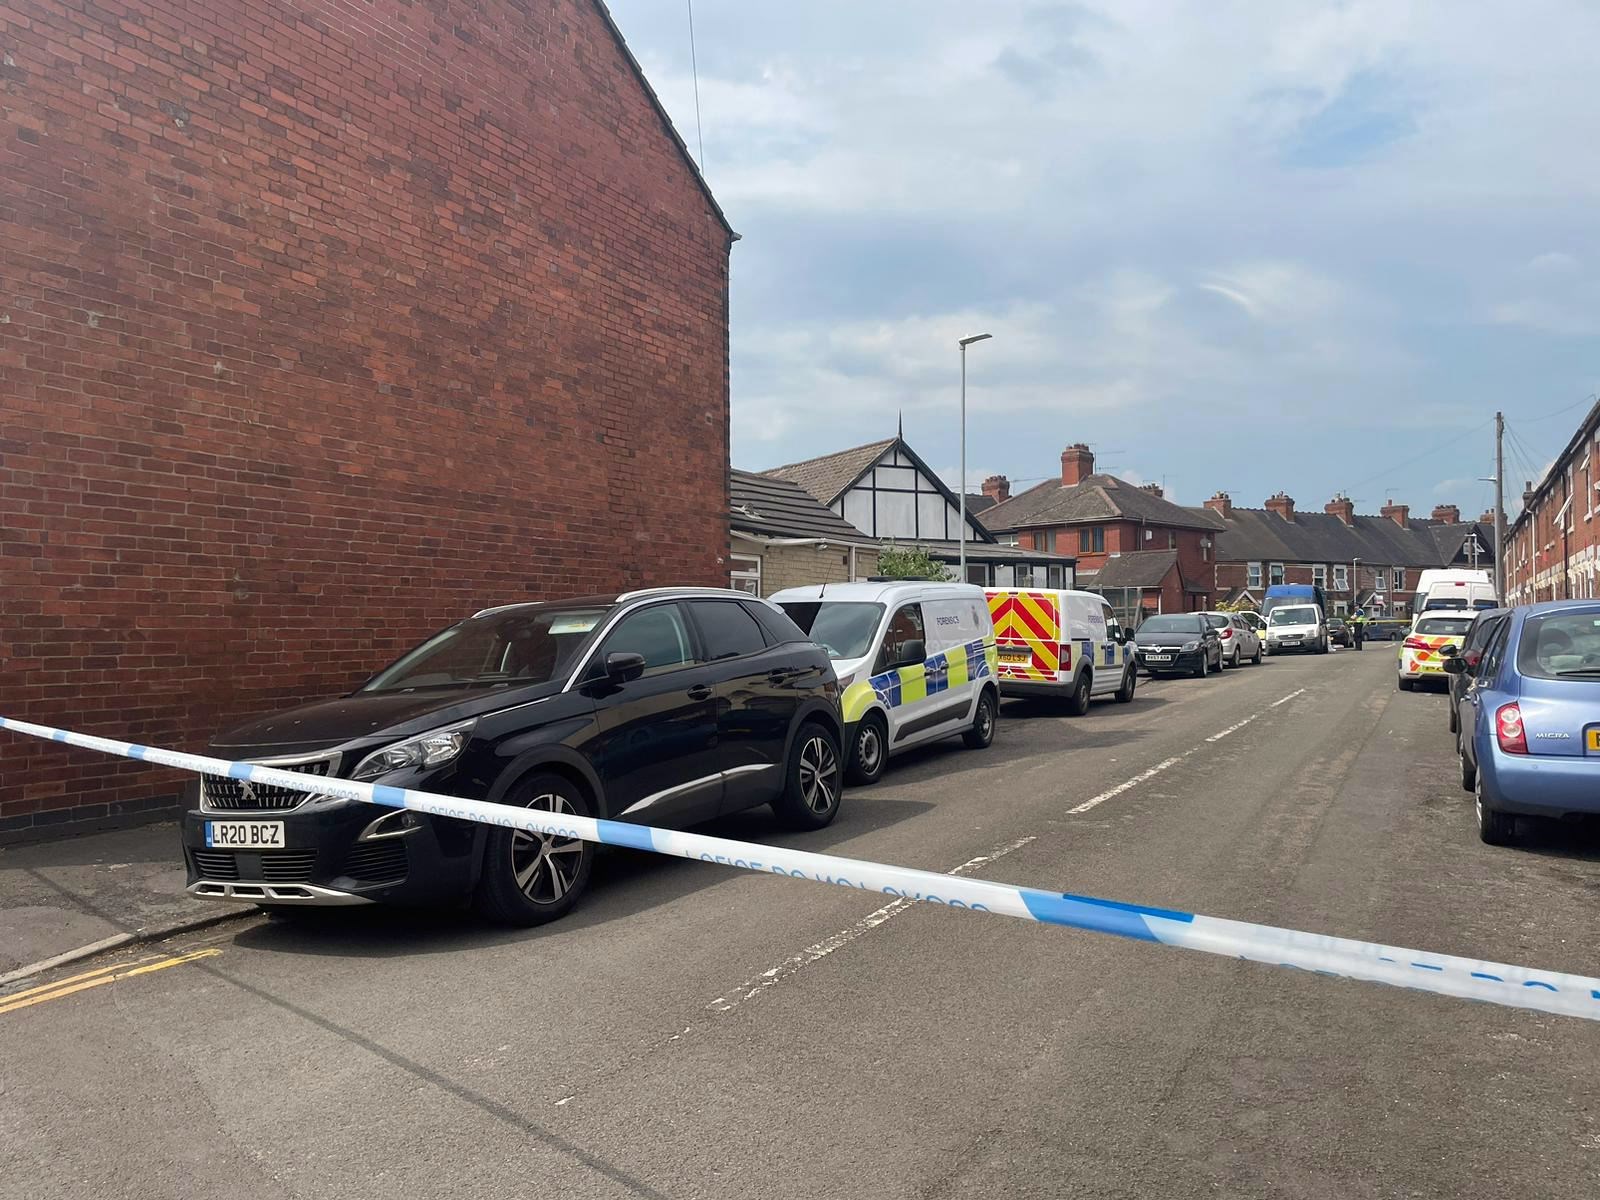 A police cordon on Flax Street, Stoke-on-Trent, where the victims of a suspected double murder were found (Stephanie Wareham/PA Wire)